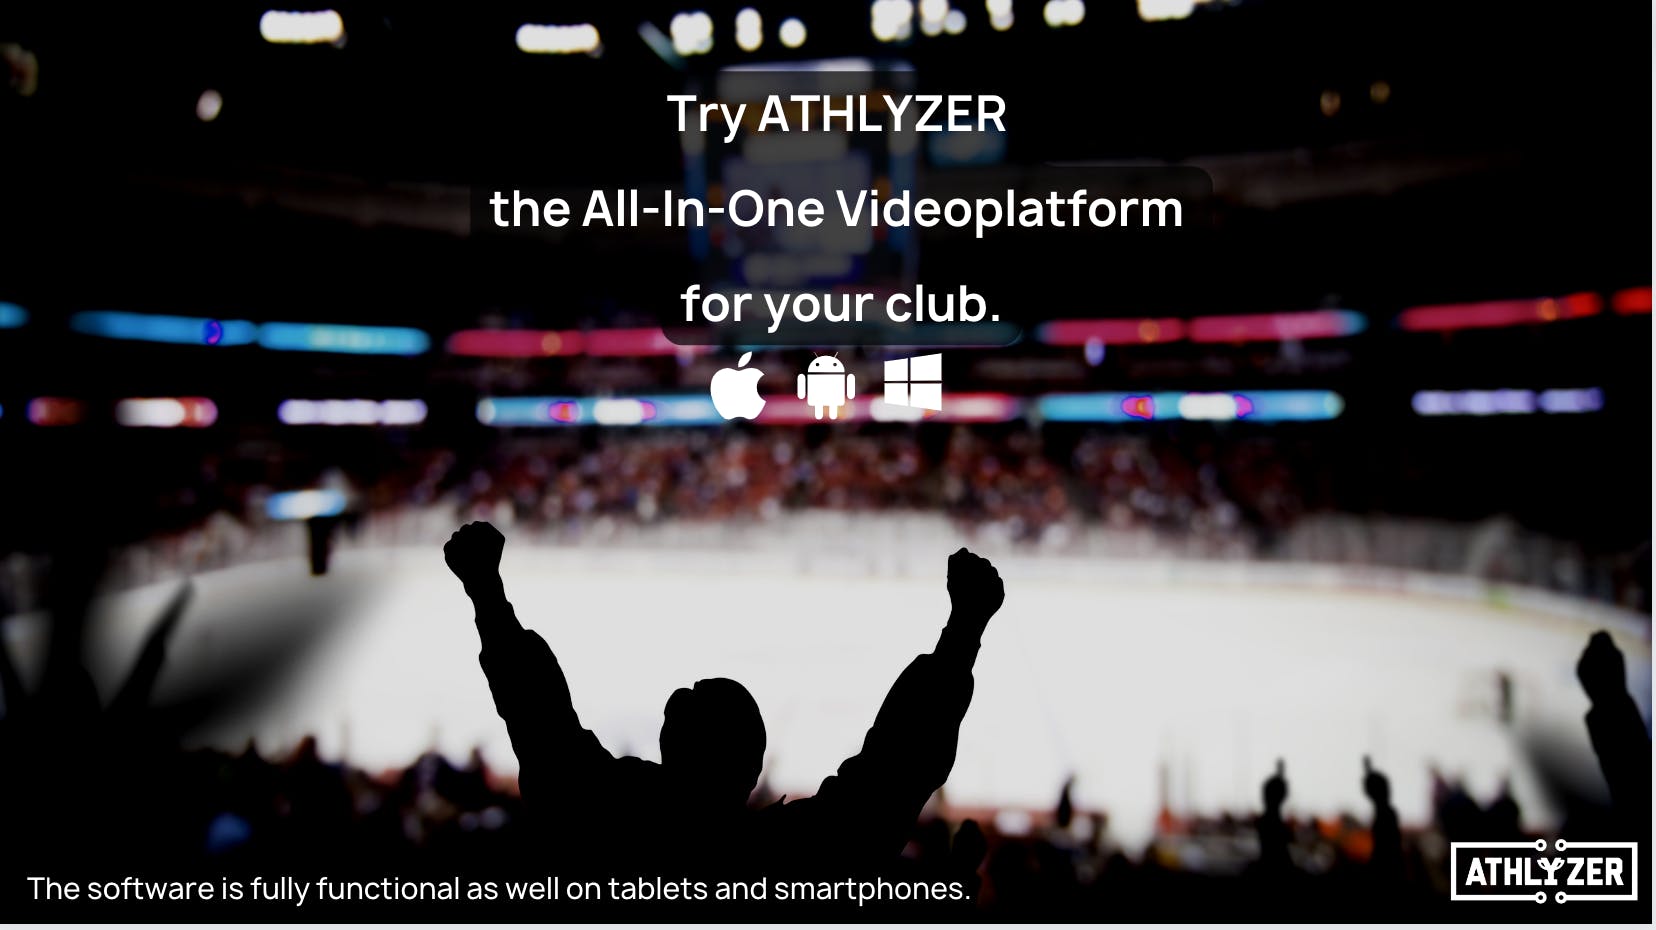 Athlyzer - try the all-in-one Videoplatform instead of Coachs eye.